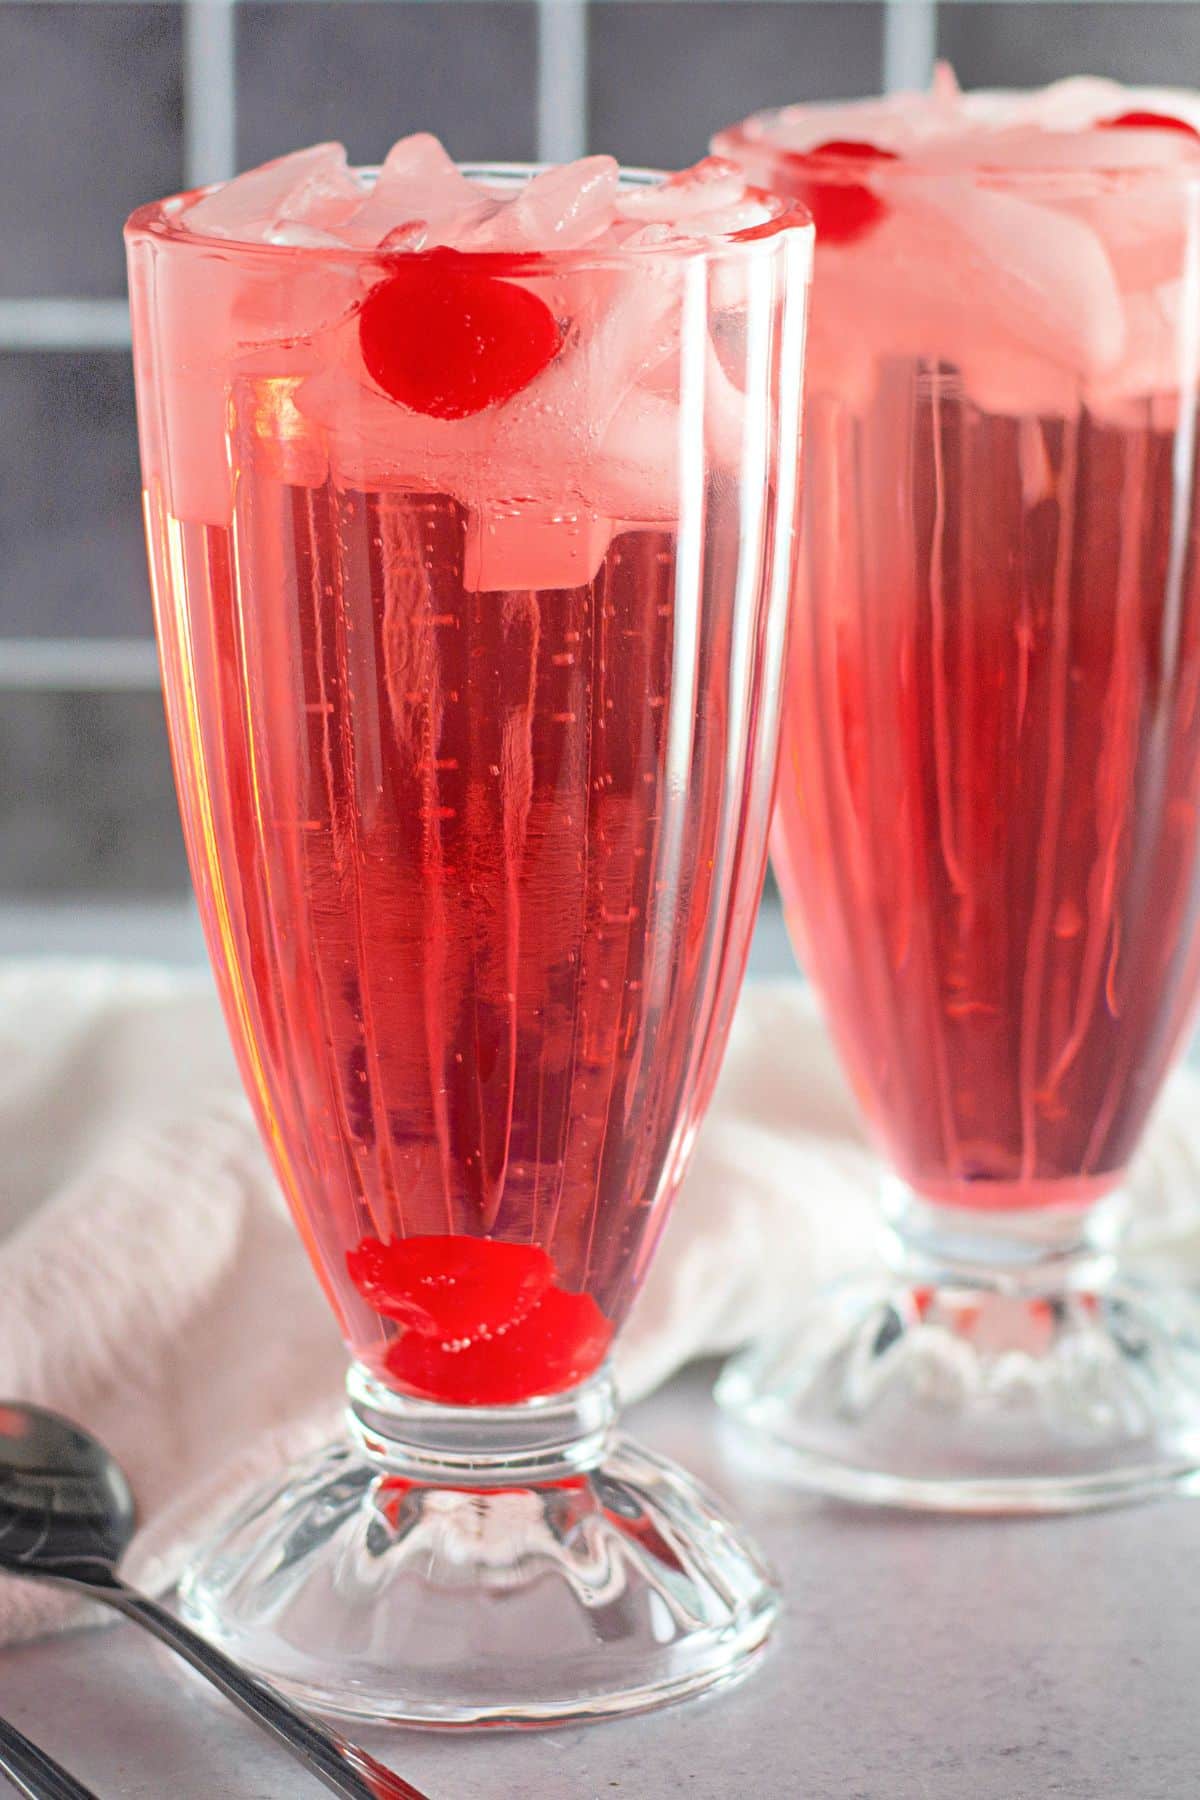 Two shirley temple drinks in clear glasses with ice.